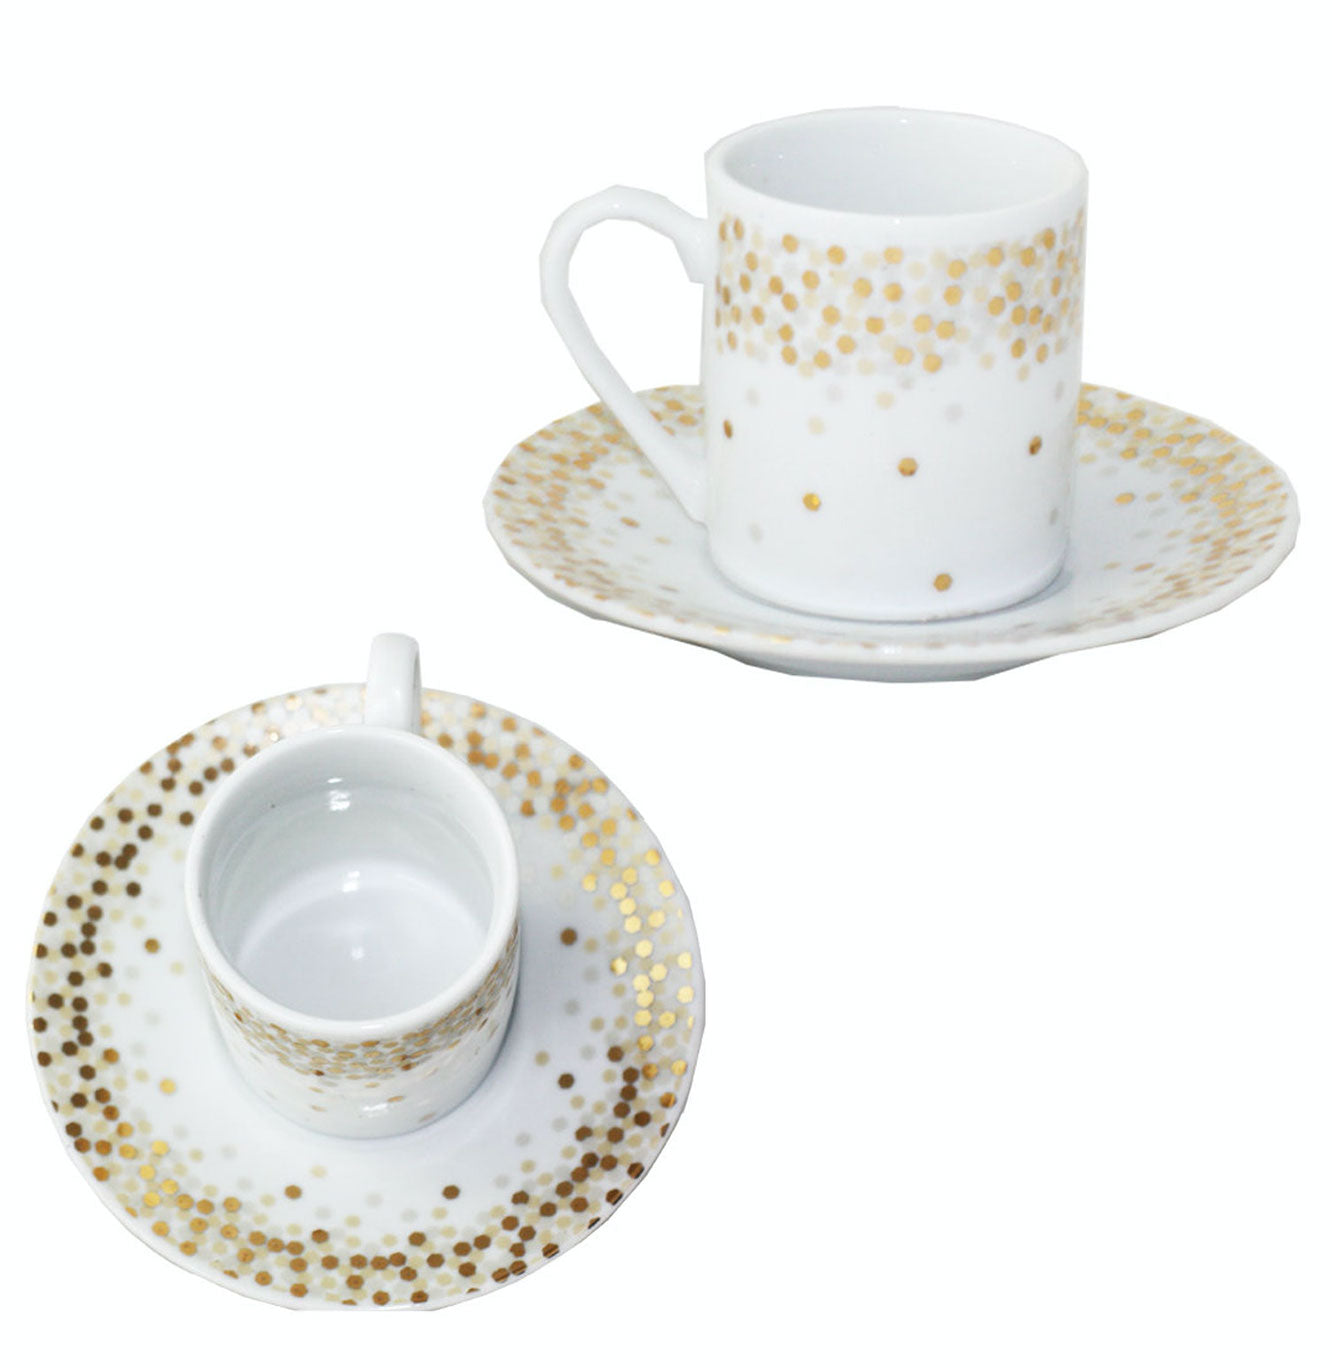 Gold Spot & White Espresso Cup and Saucer from China Blue